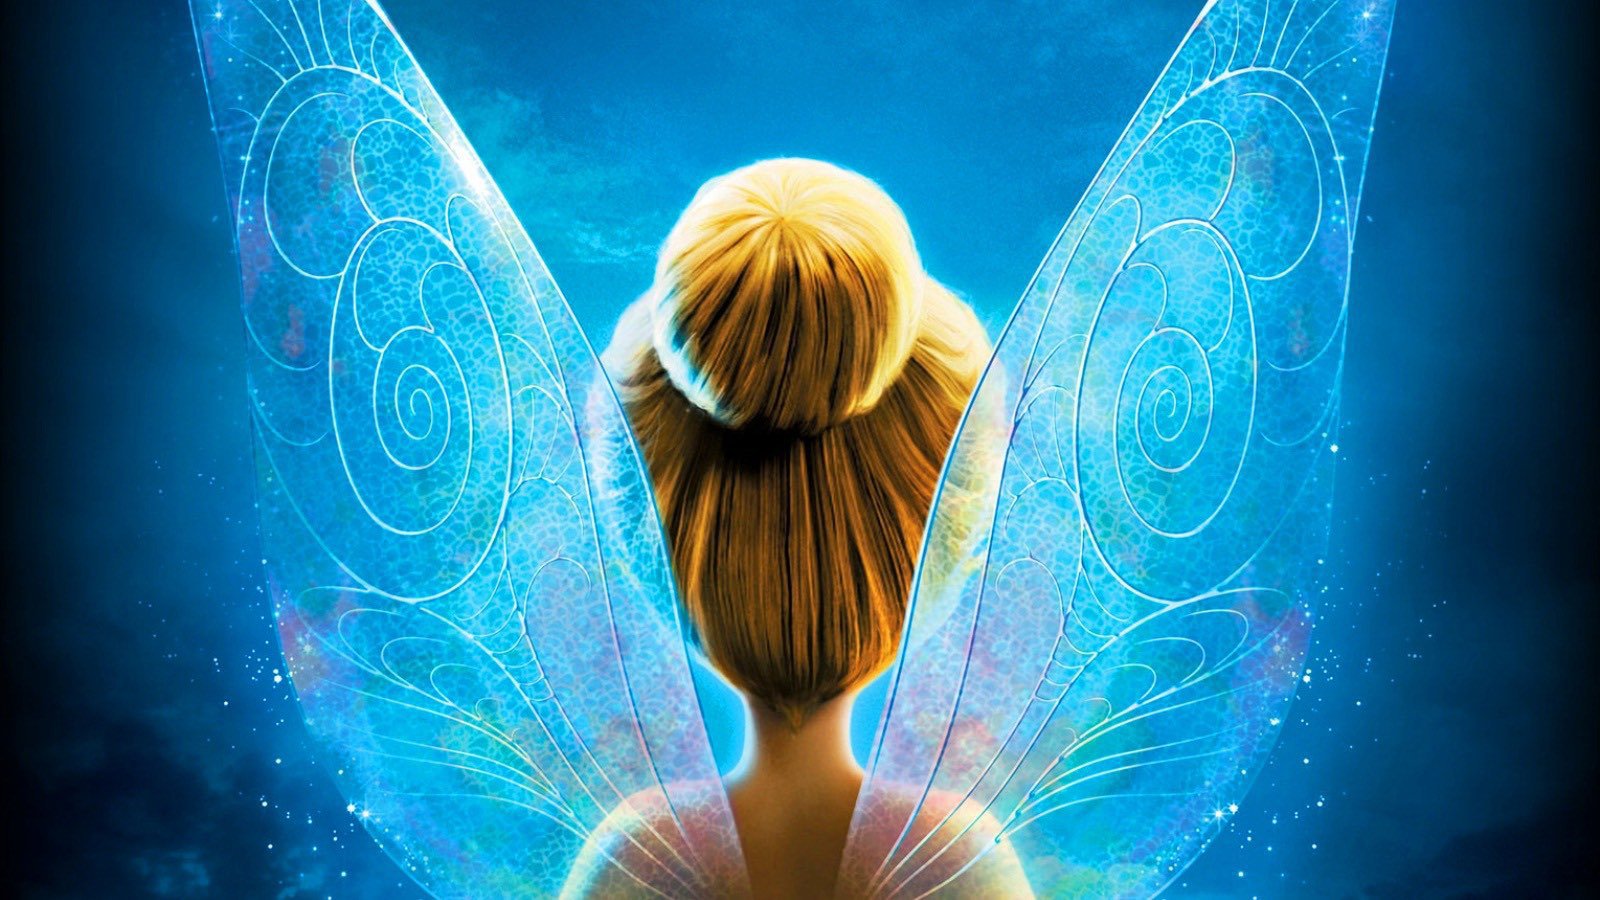 Tinker Bell Movie Reese Witherspoon To Star